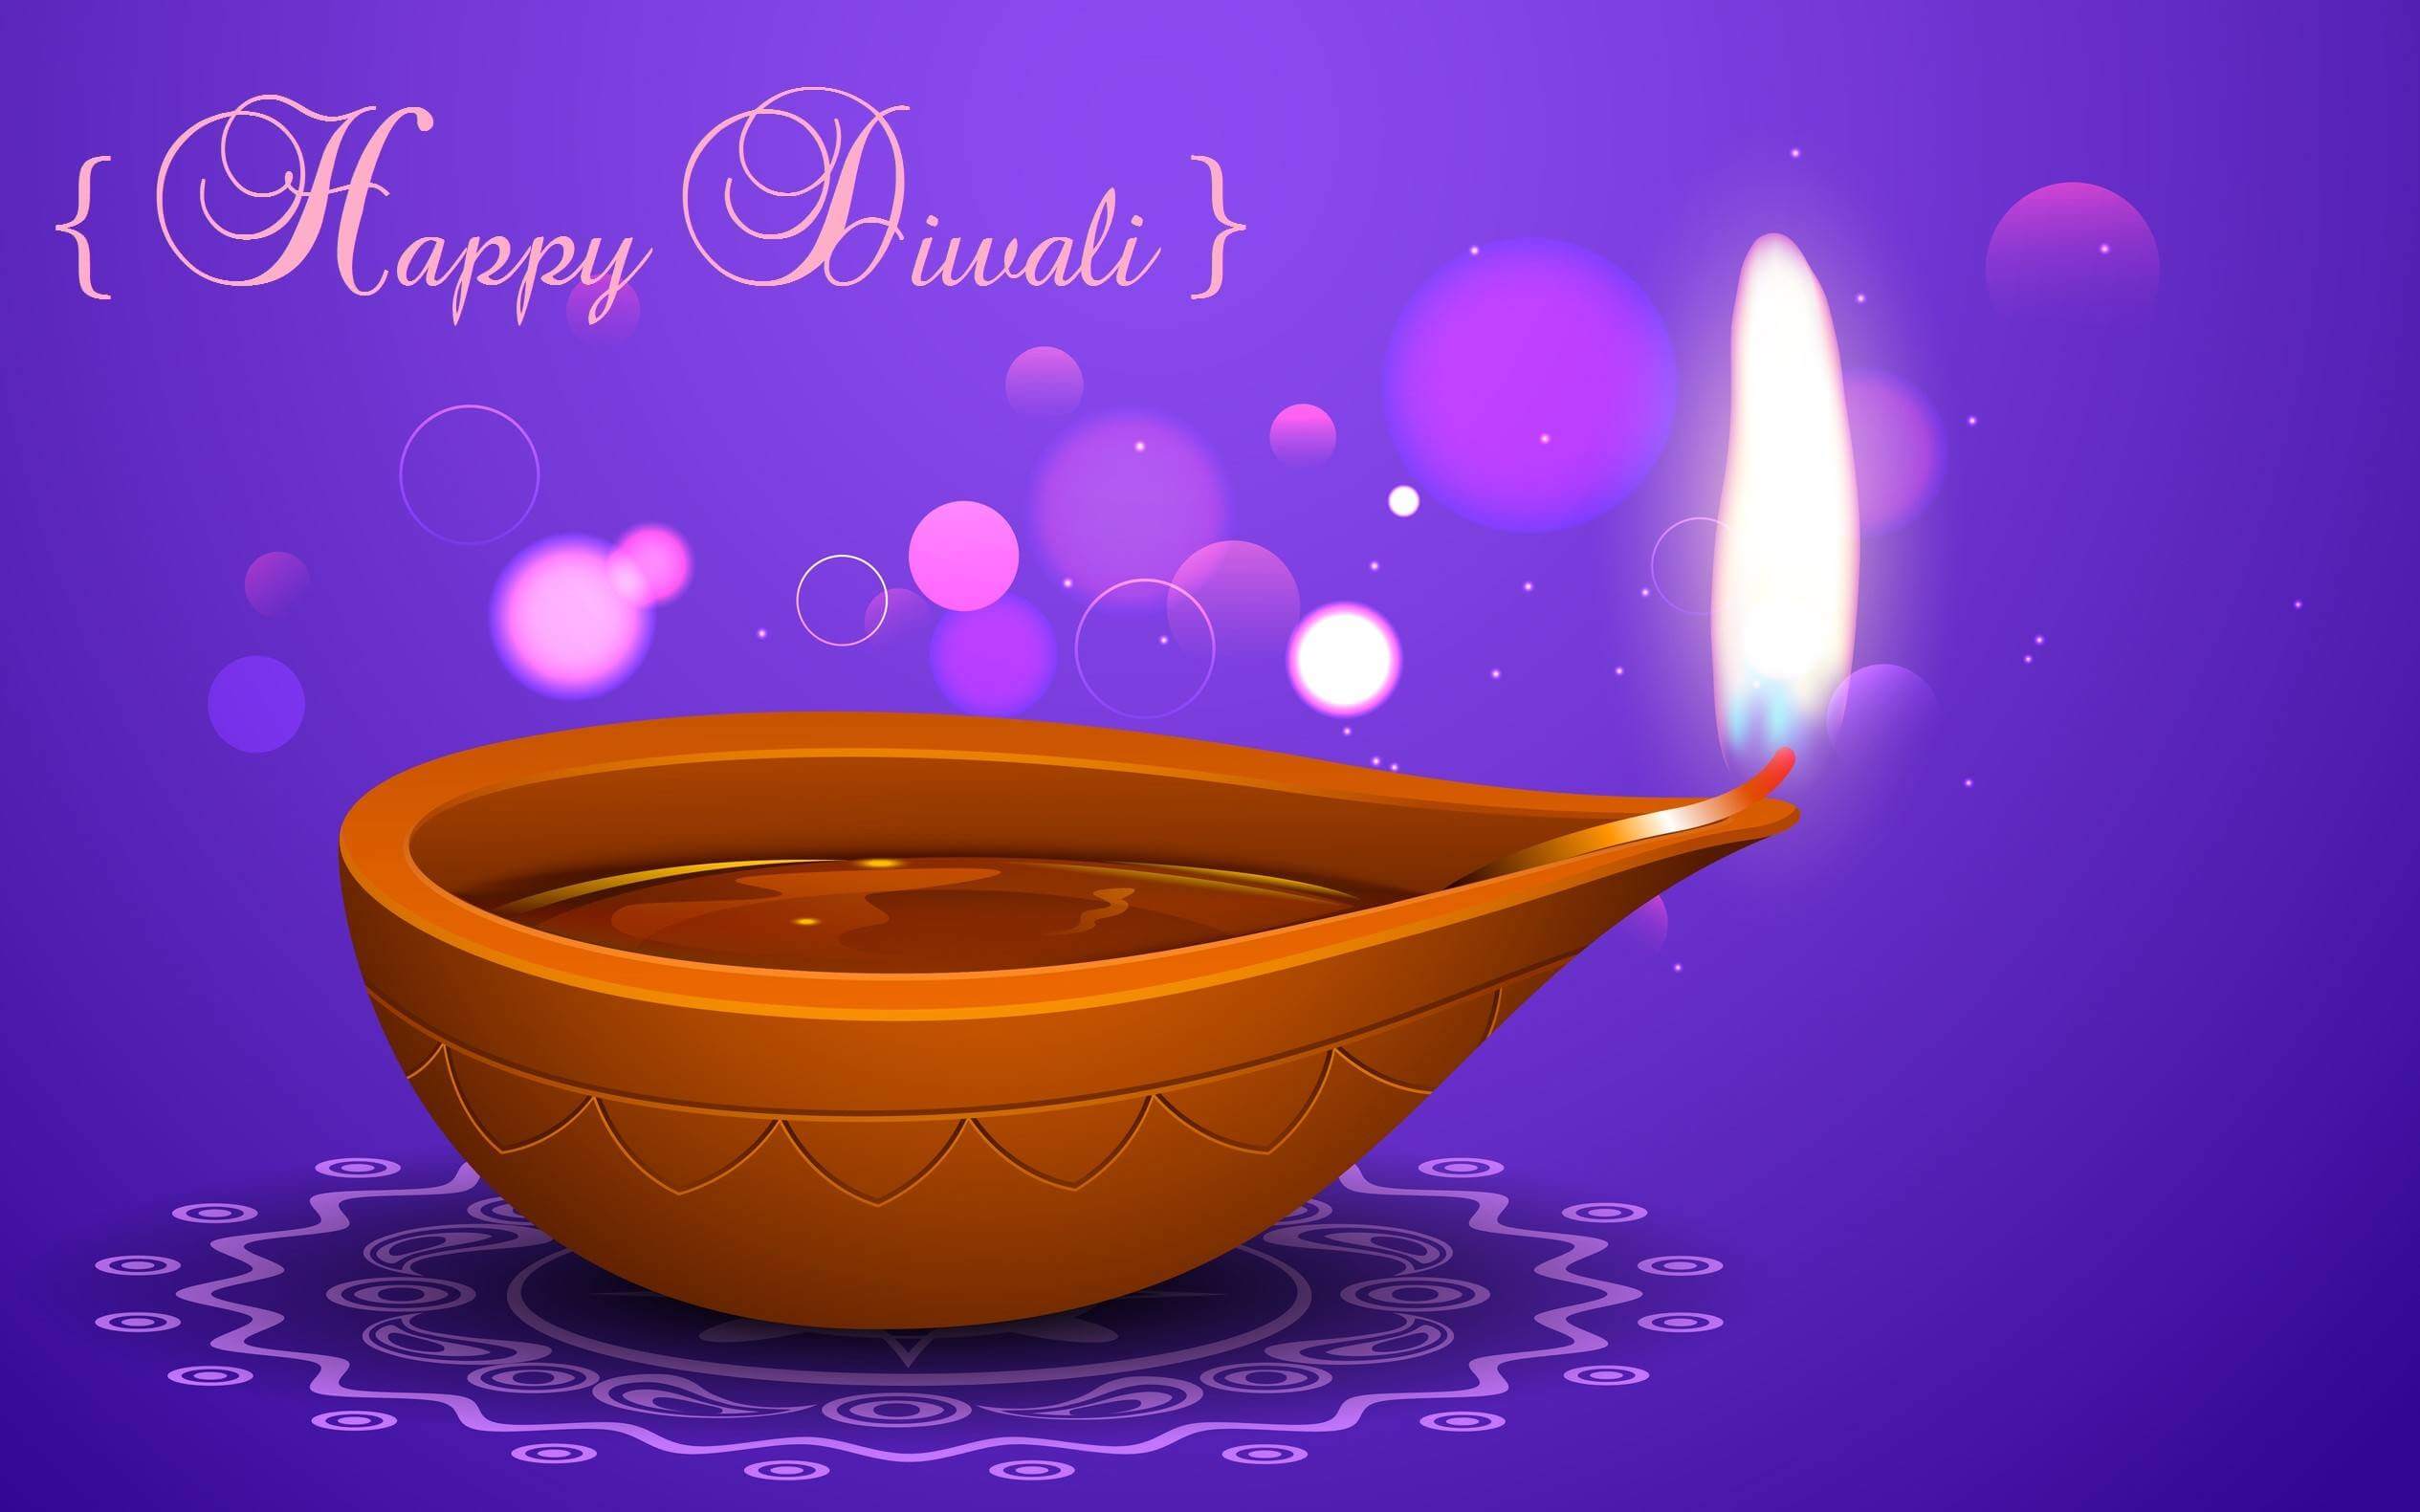 A Beautiful Collection Of Diwali Wallpapers Greetings Cards Cgfrog